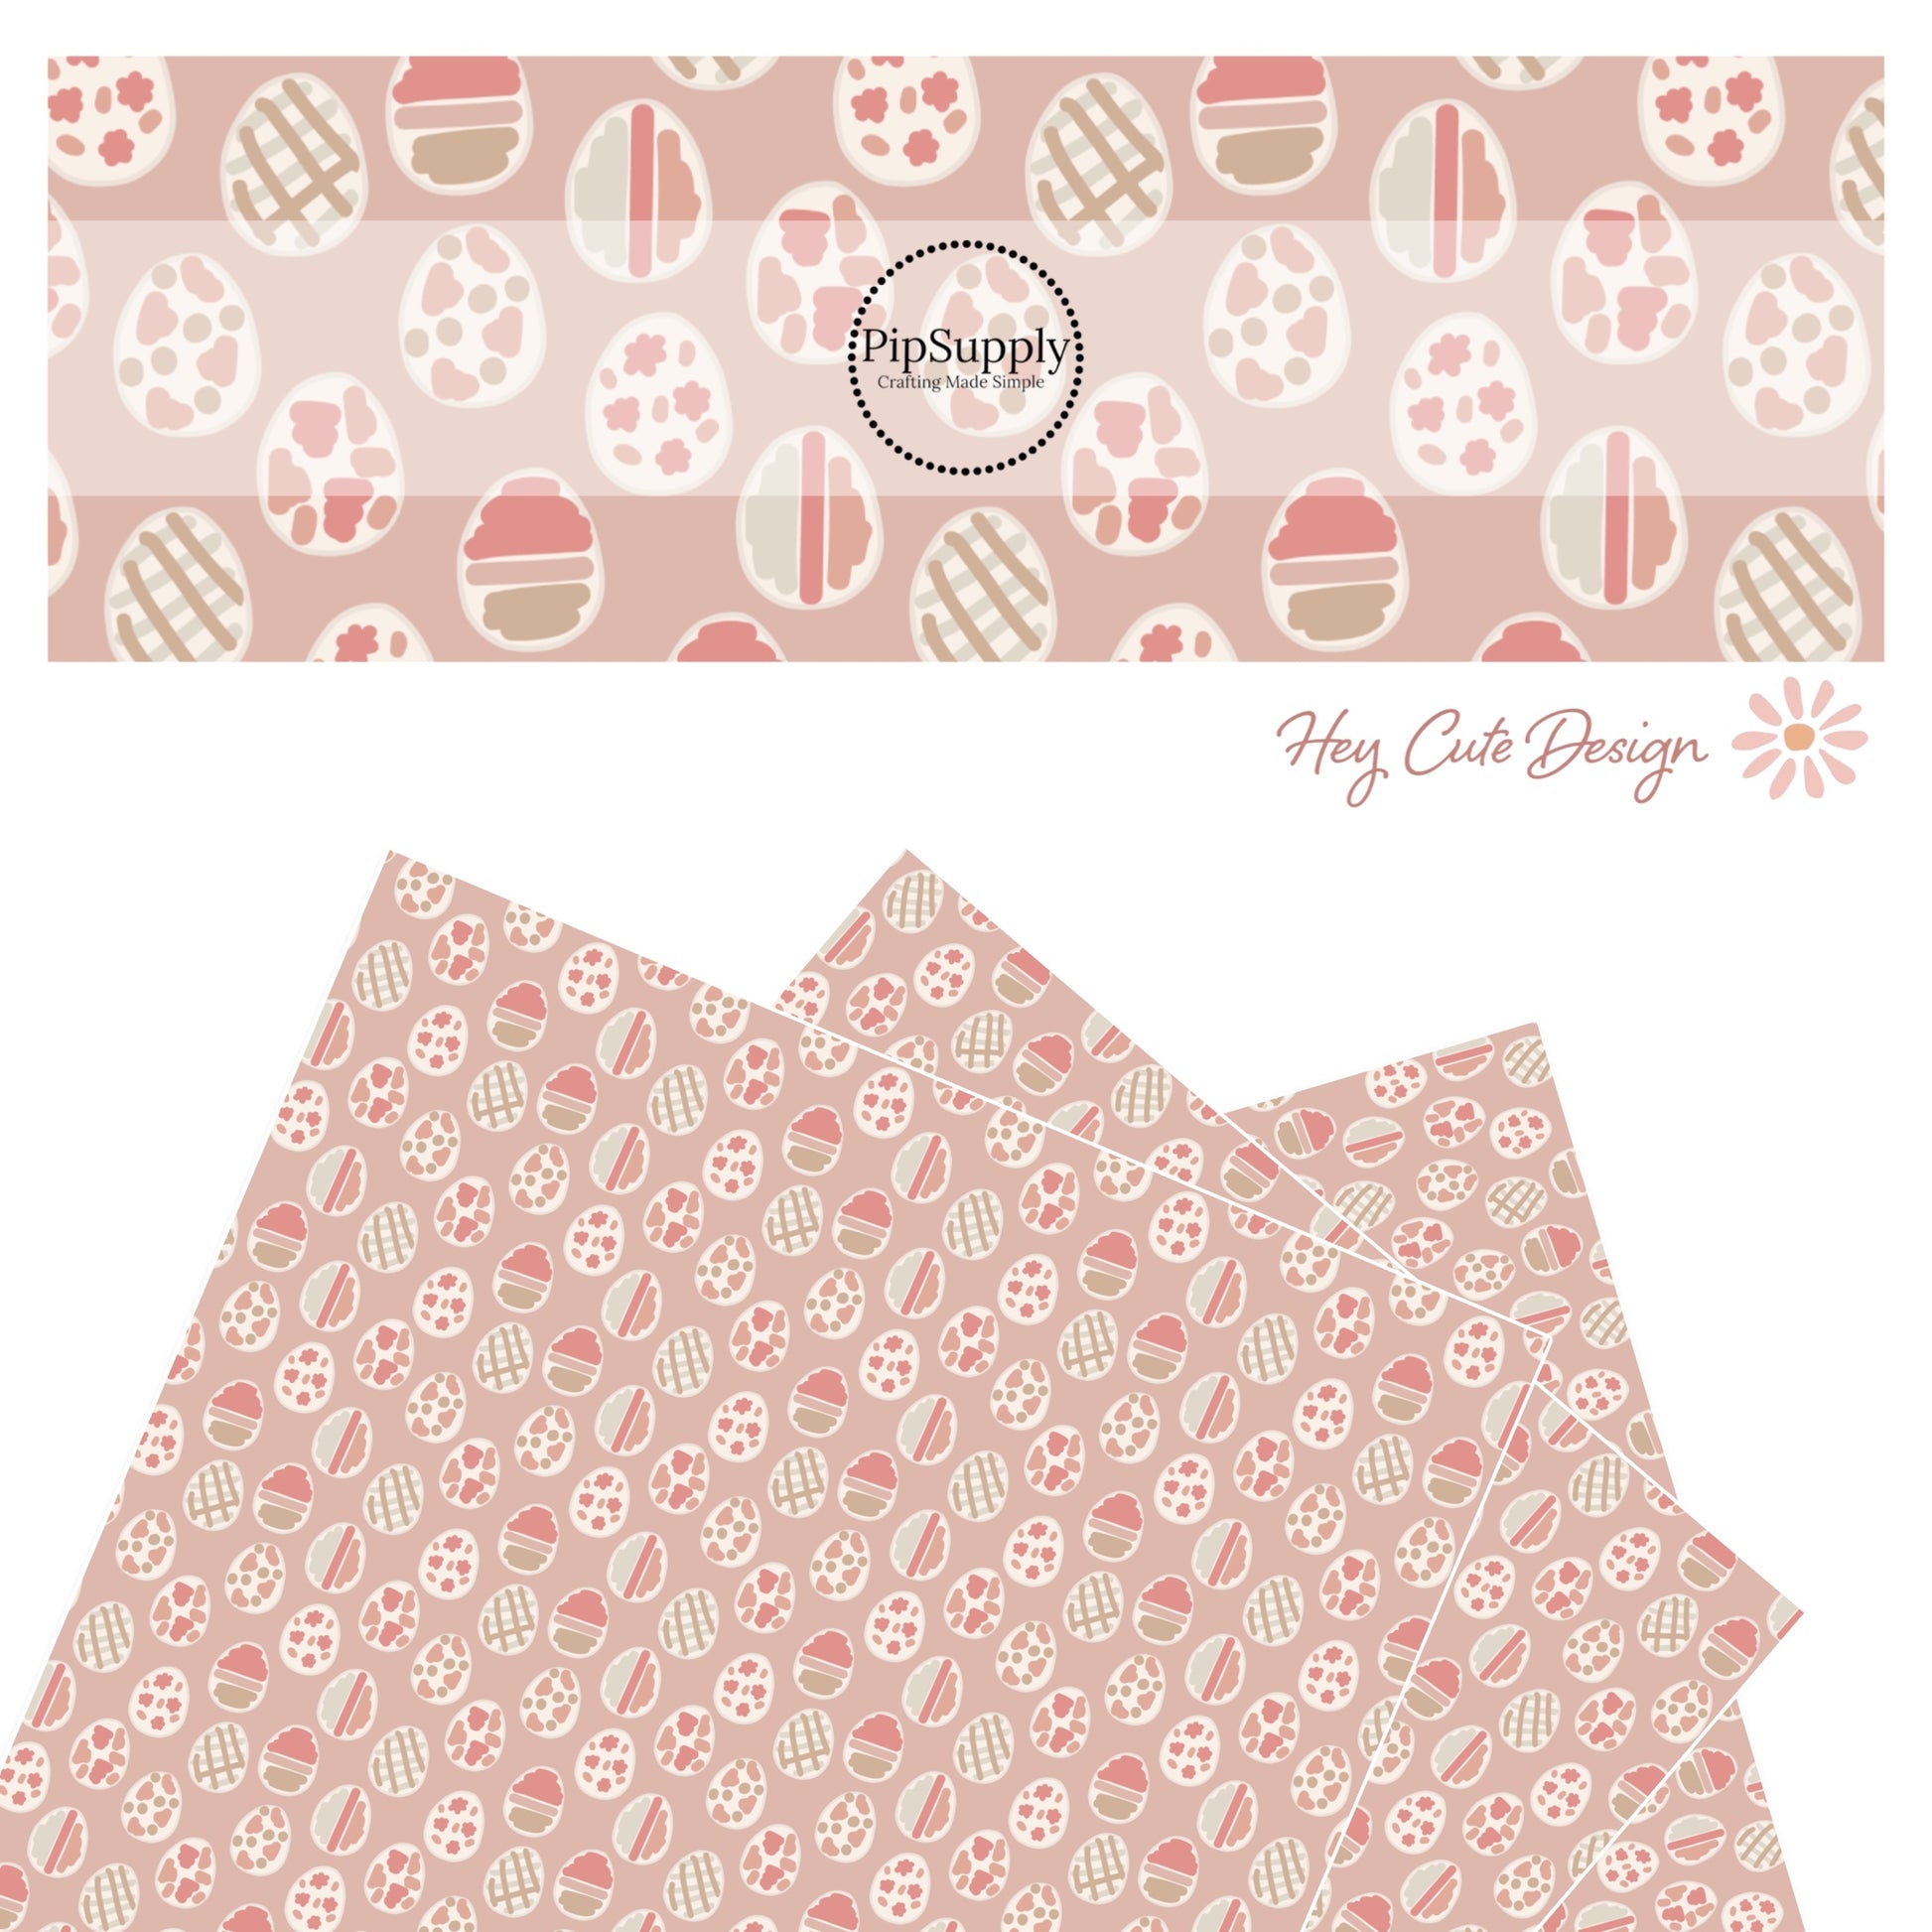 Blend of different patterned eggs on pink faux leather sheet.